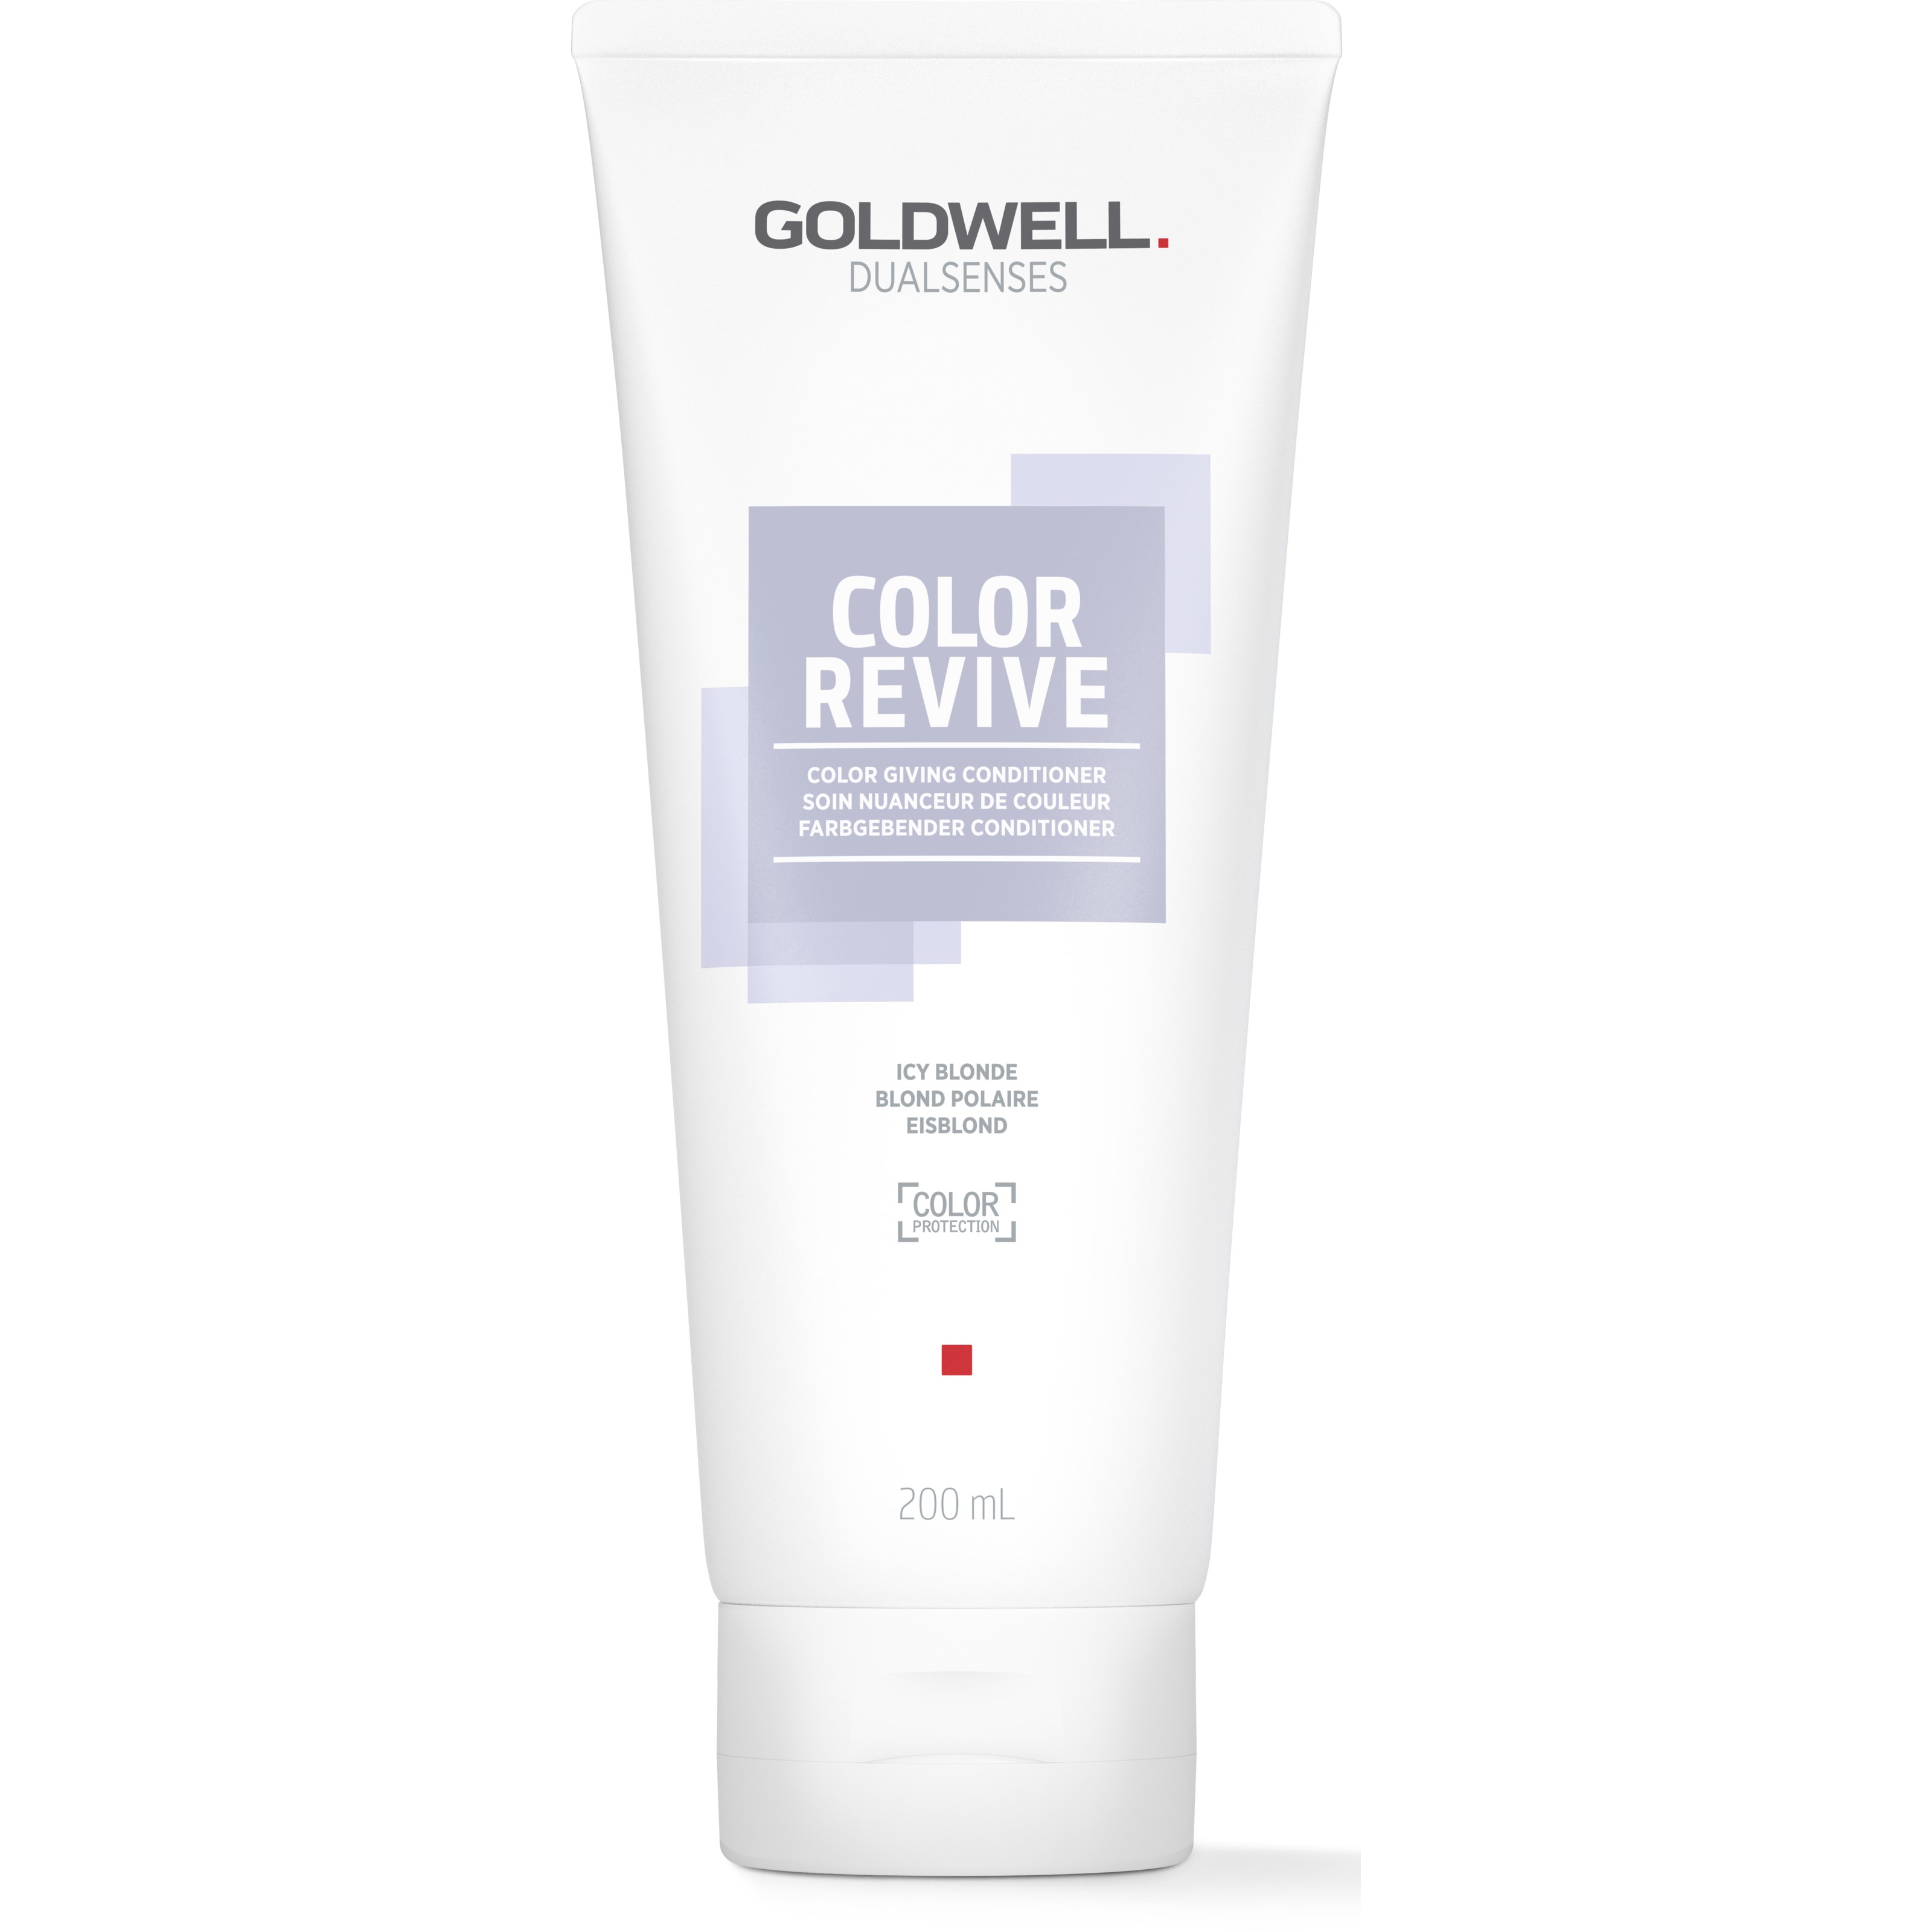 Bilde av Goldwell Dualsenses Color Revive Color Giving Conditioner Icy Blonde